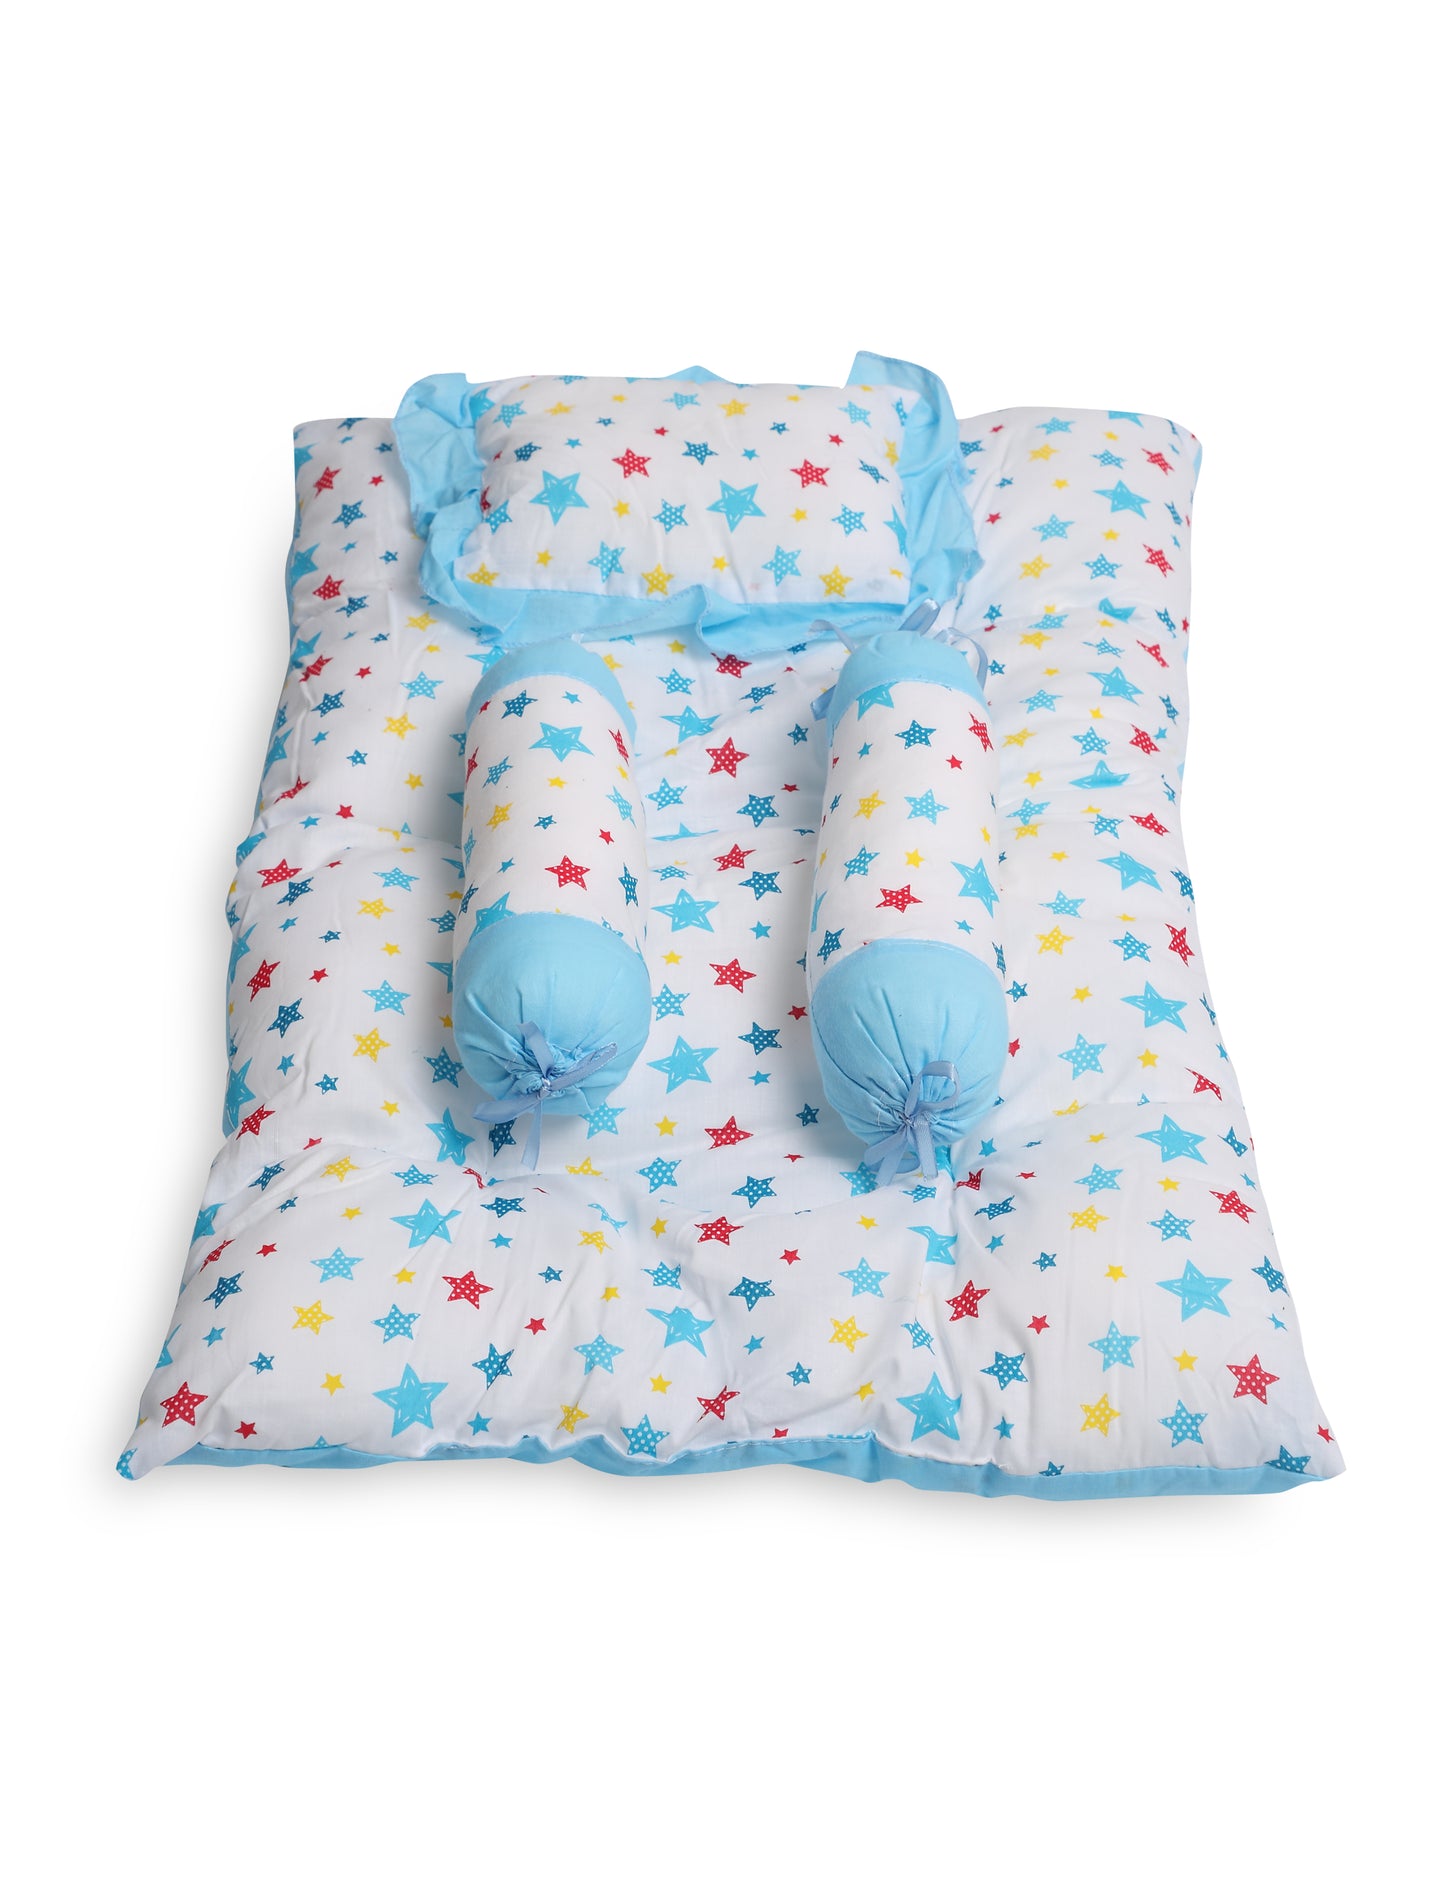 VParents Joy Baby 4 Piece Bedding Set with Pillow and Bolsters